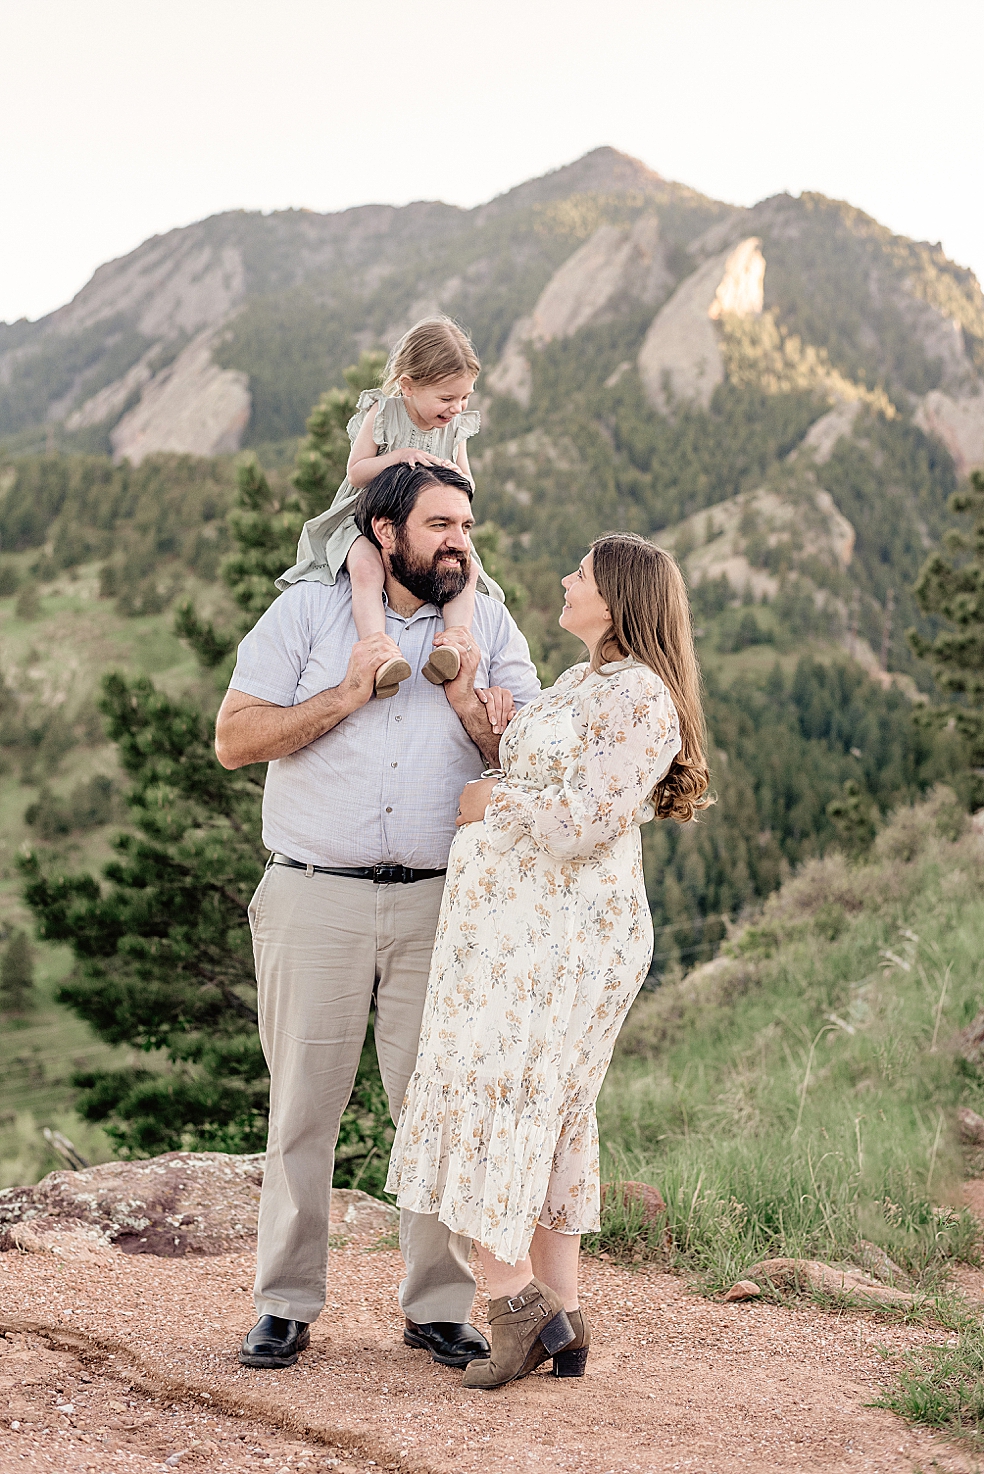 Family playing together during family photos | Photo by Meridianville Maternity Photographer Jessica Lee